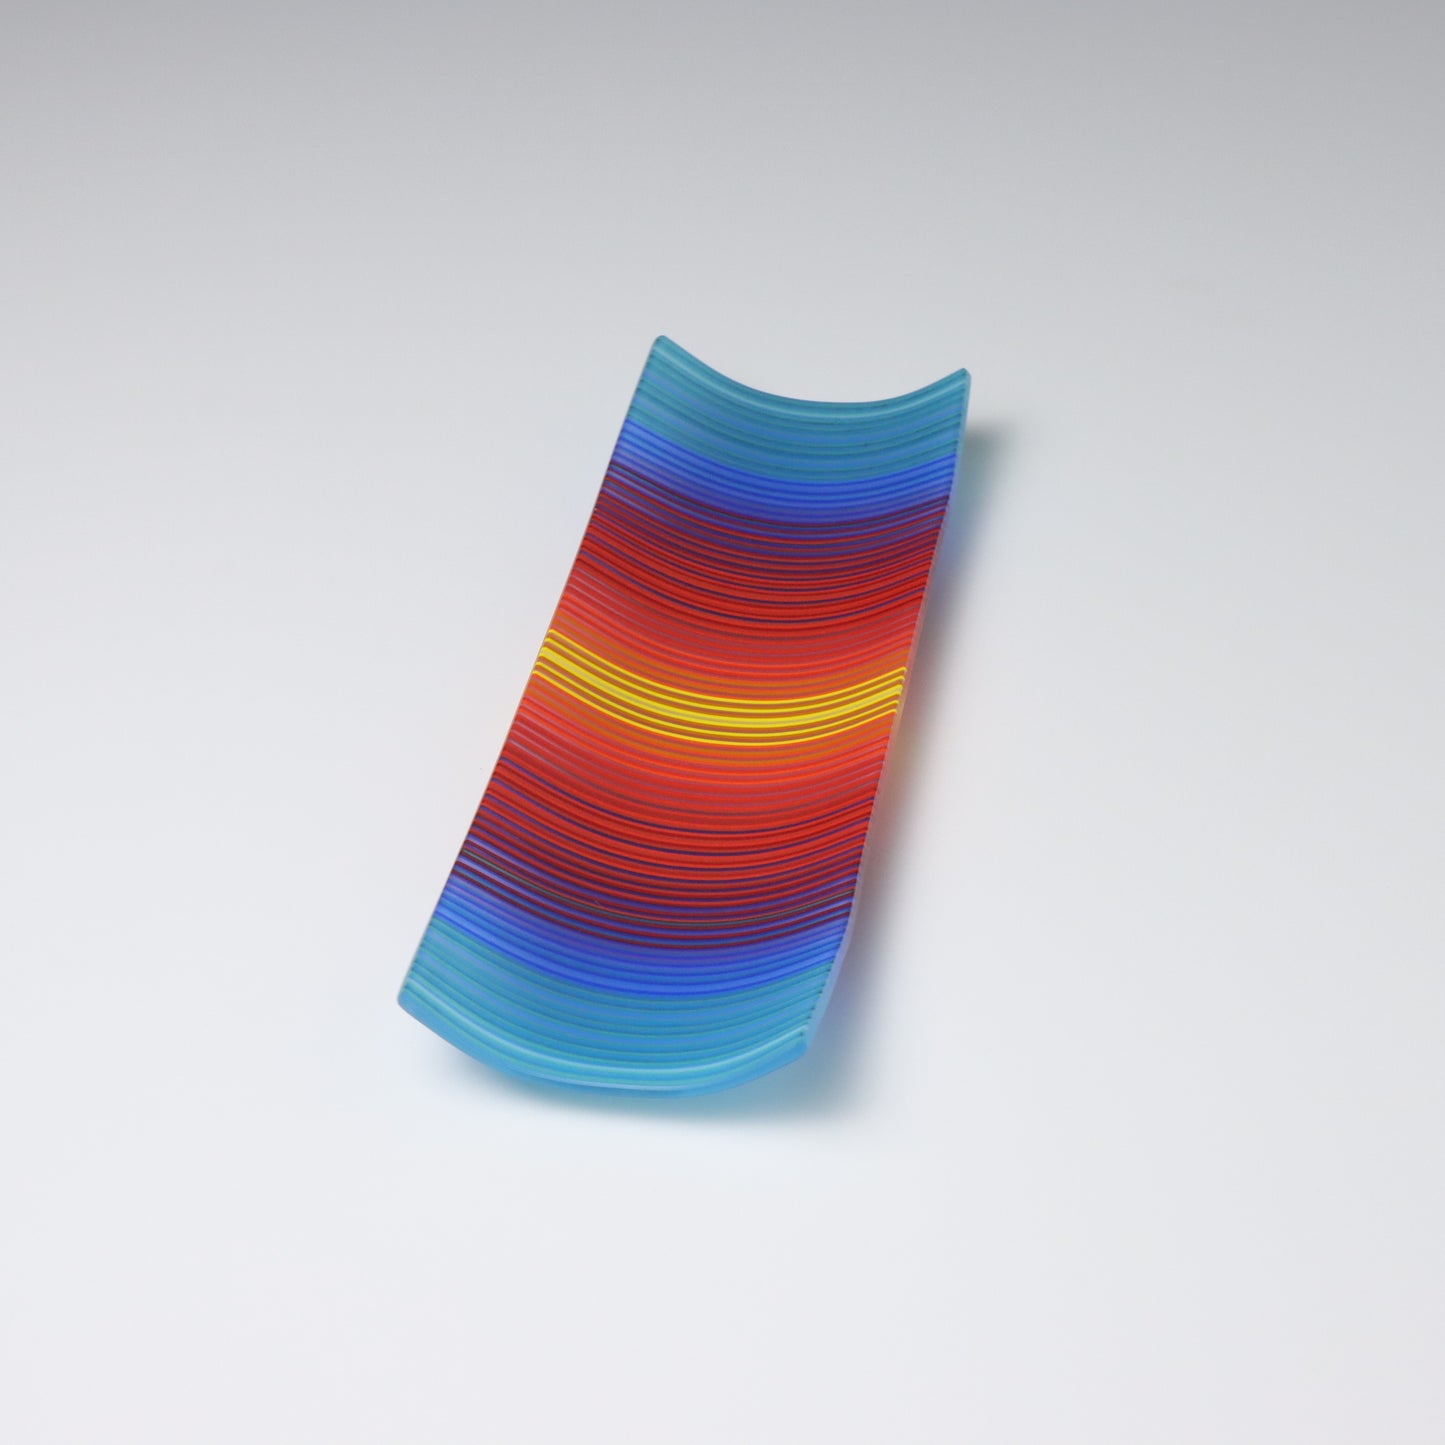 S3361 | Rectangular Shaped ColourWave Glass Plate | Turquoise Blue, Purple, Red and Yellow